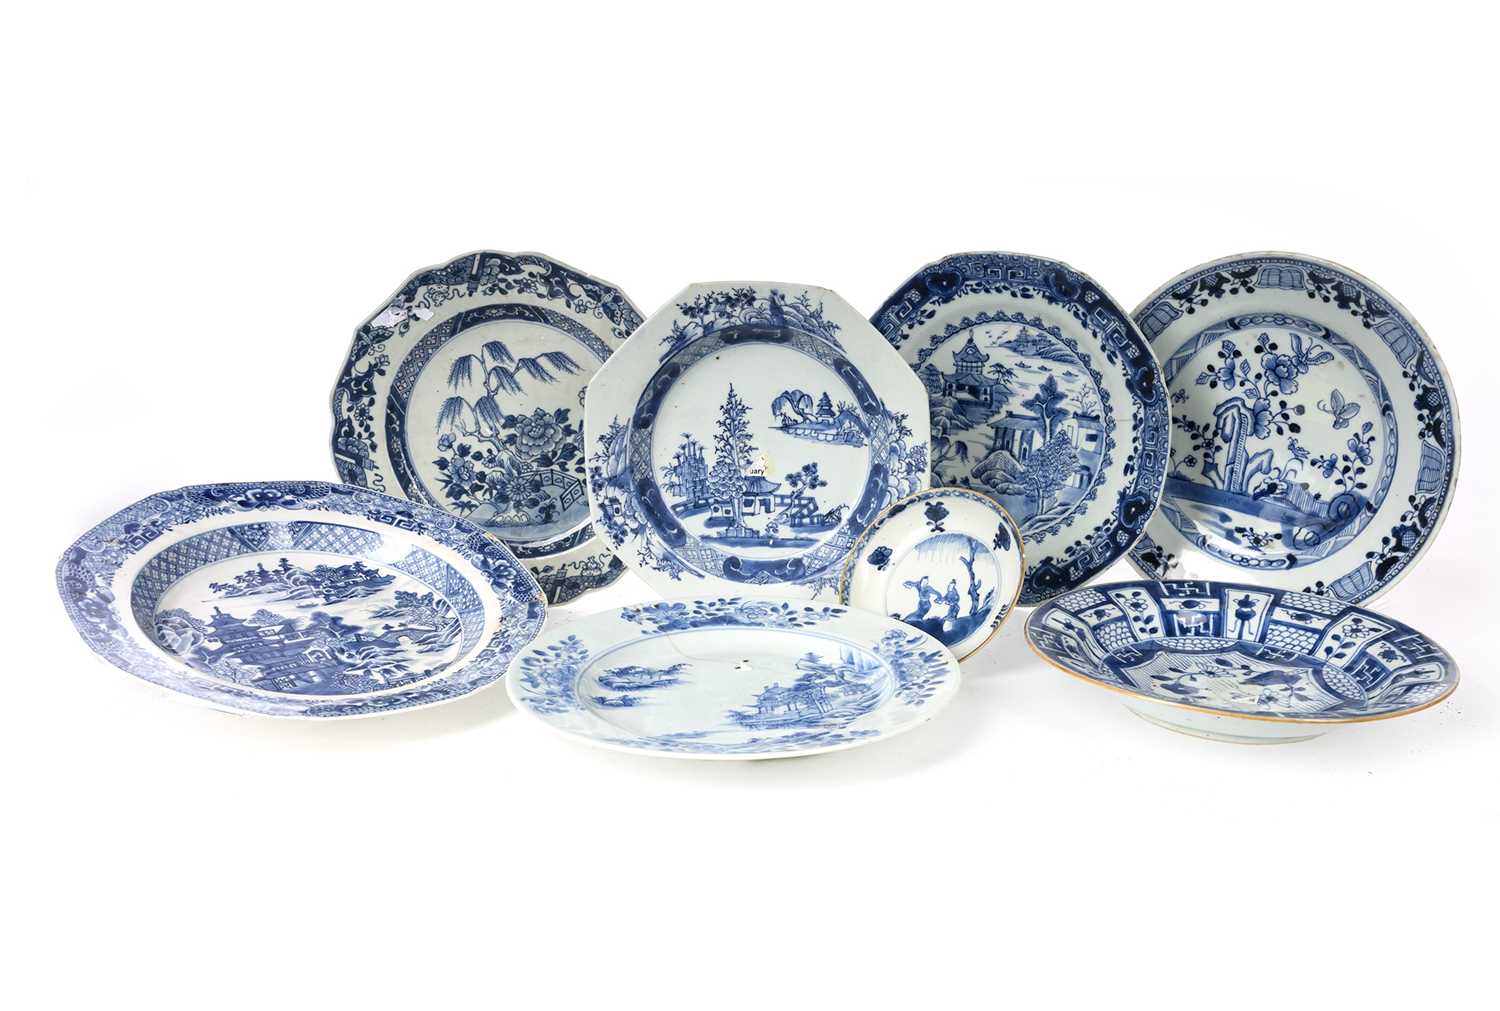 GROUP OF 18TH CENTURY CHINESE BLUE AND WHITE PLATES AND SAUCER, QIANLONG PERIOD 1736 - 1795